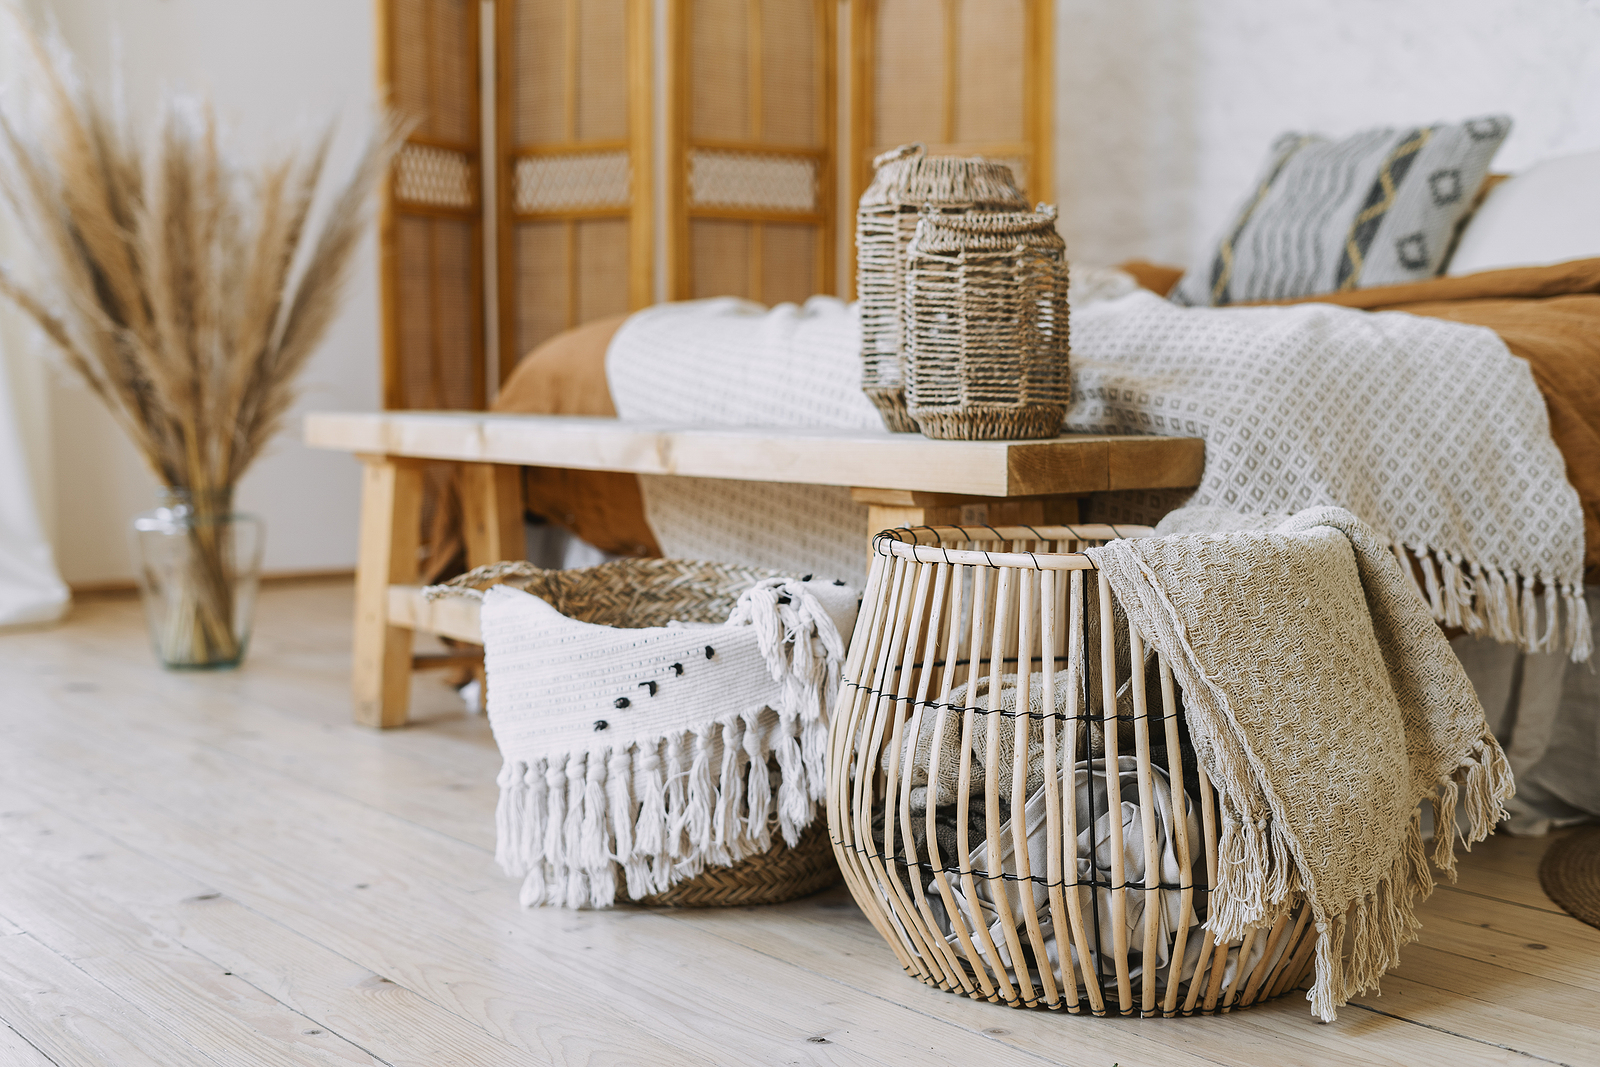 Whites and Cream Baskets and blankets for master bedoom decoration